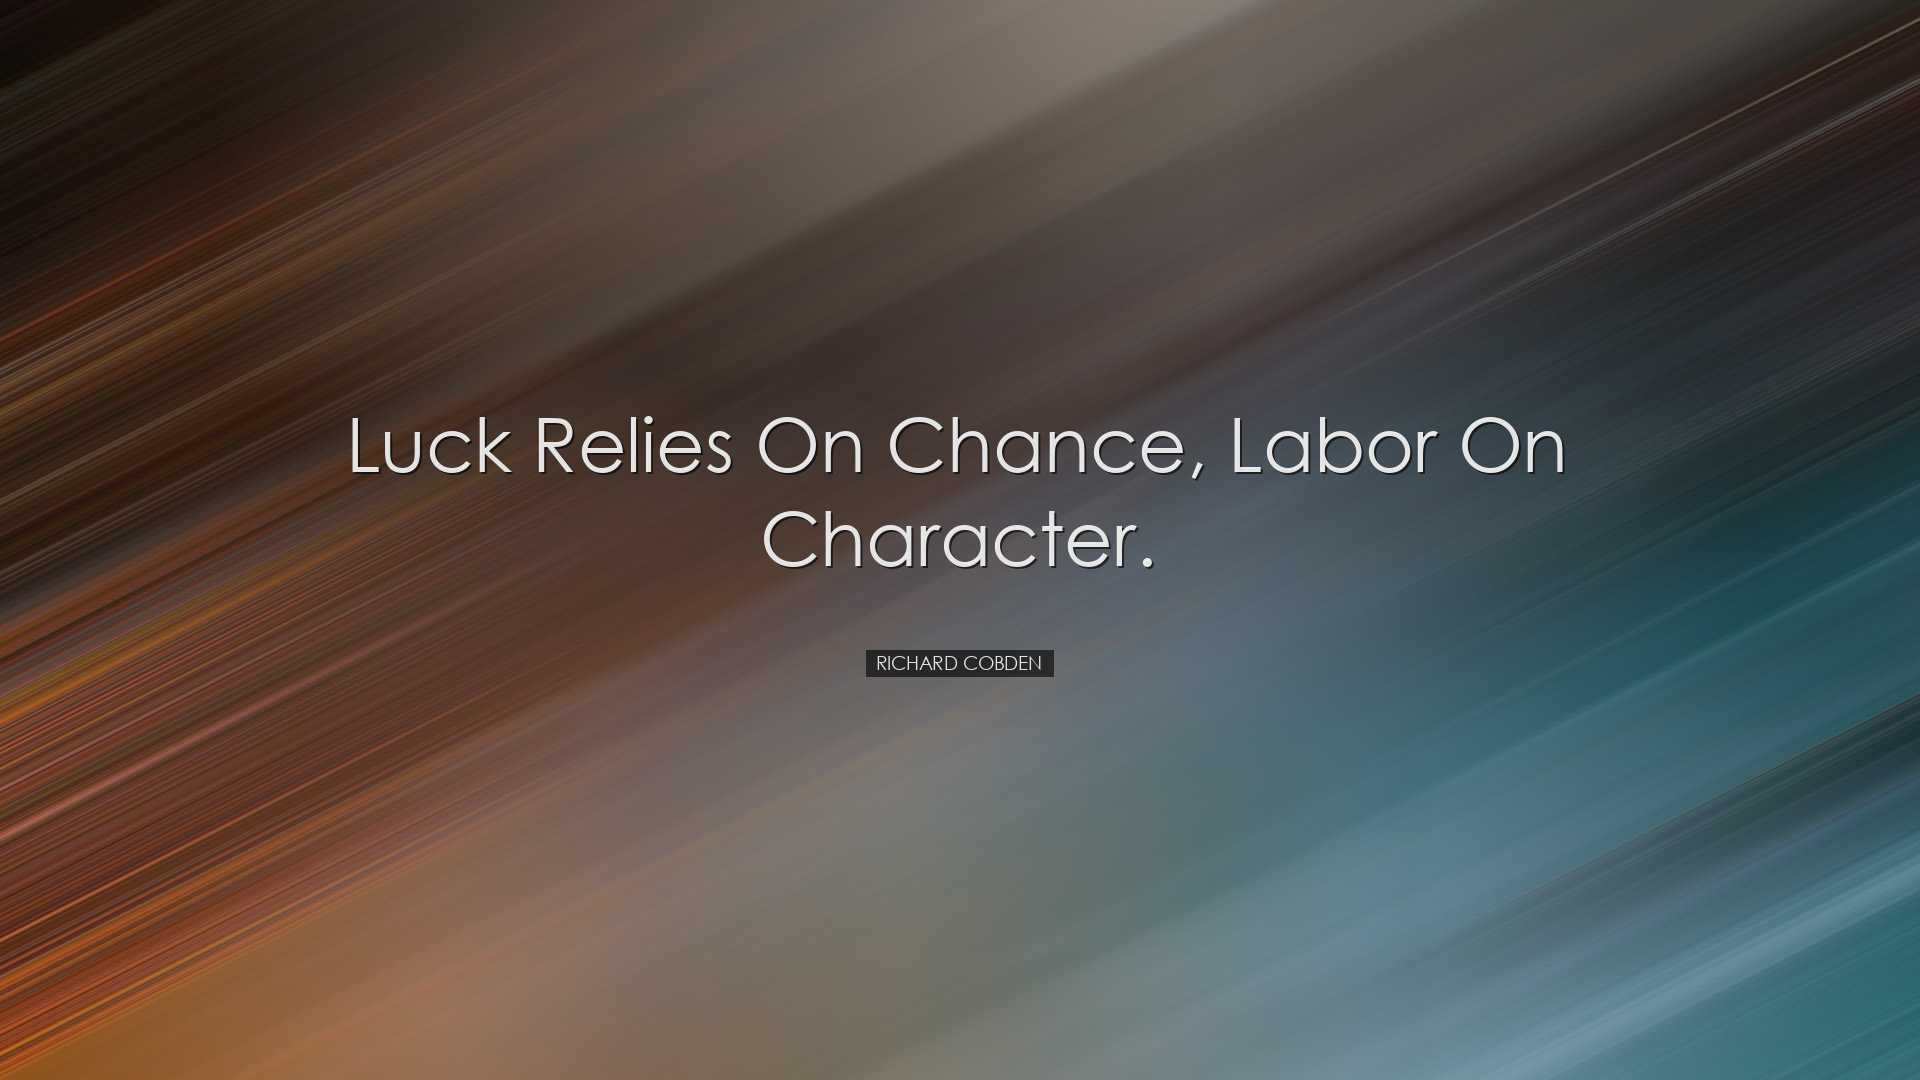 Luck relies on chance, labor on character. - Richard Cobden